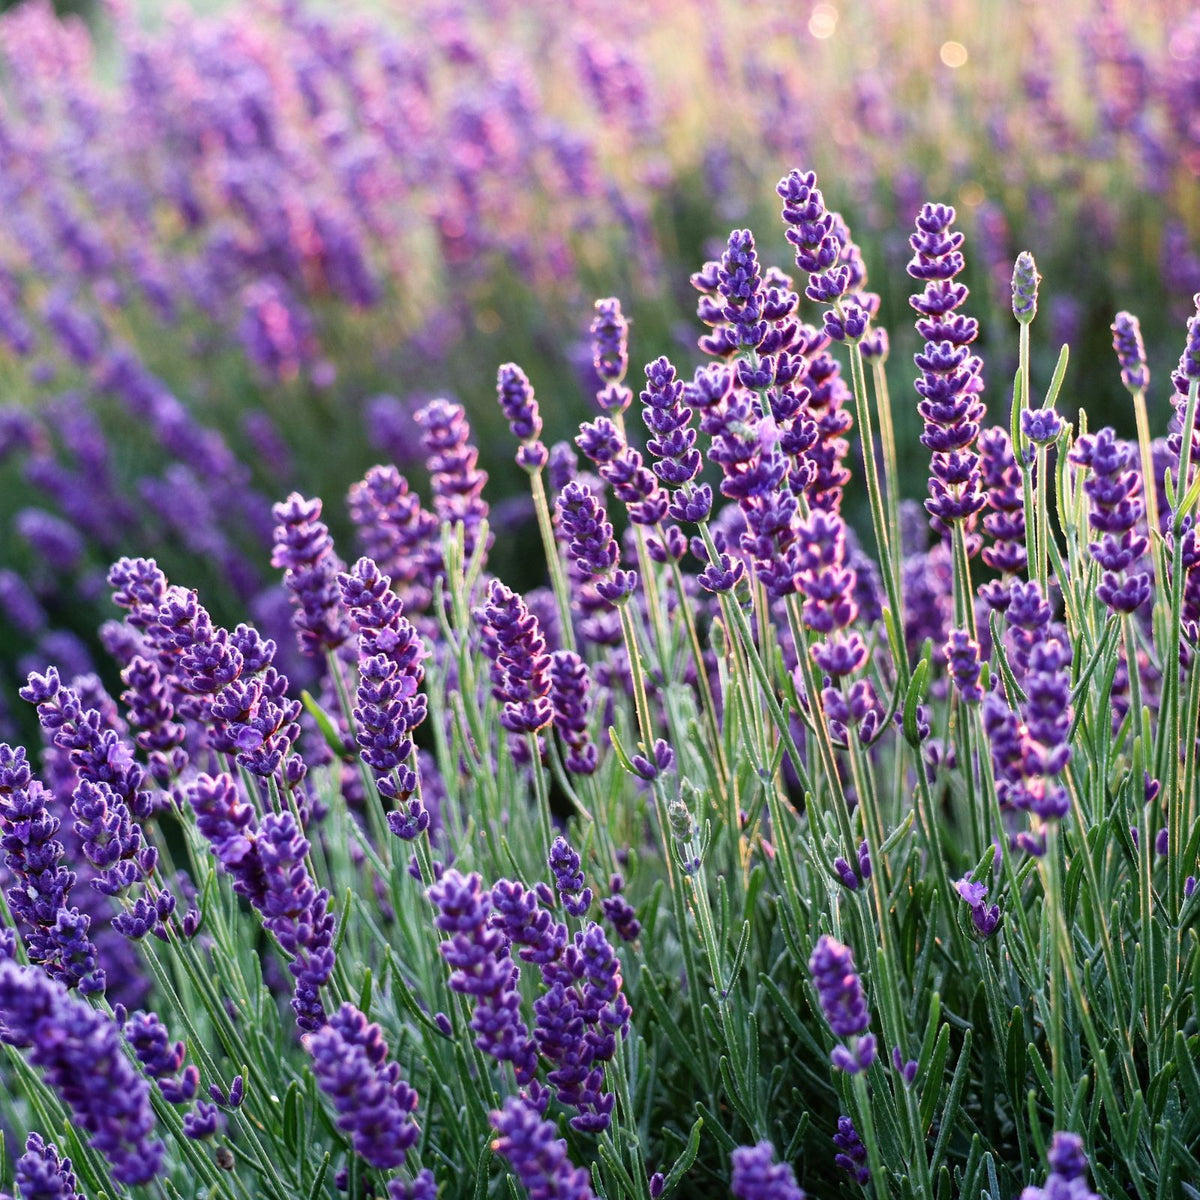 Hidcote Lavender Plant- Two (2) Live Plants - Not Seeds -Each 4 inch-7 inch Tall- in 3.5 inch Pots